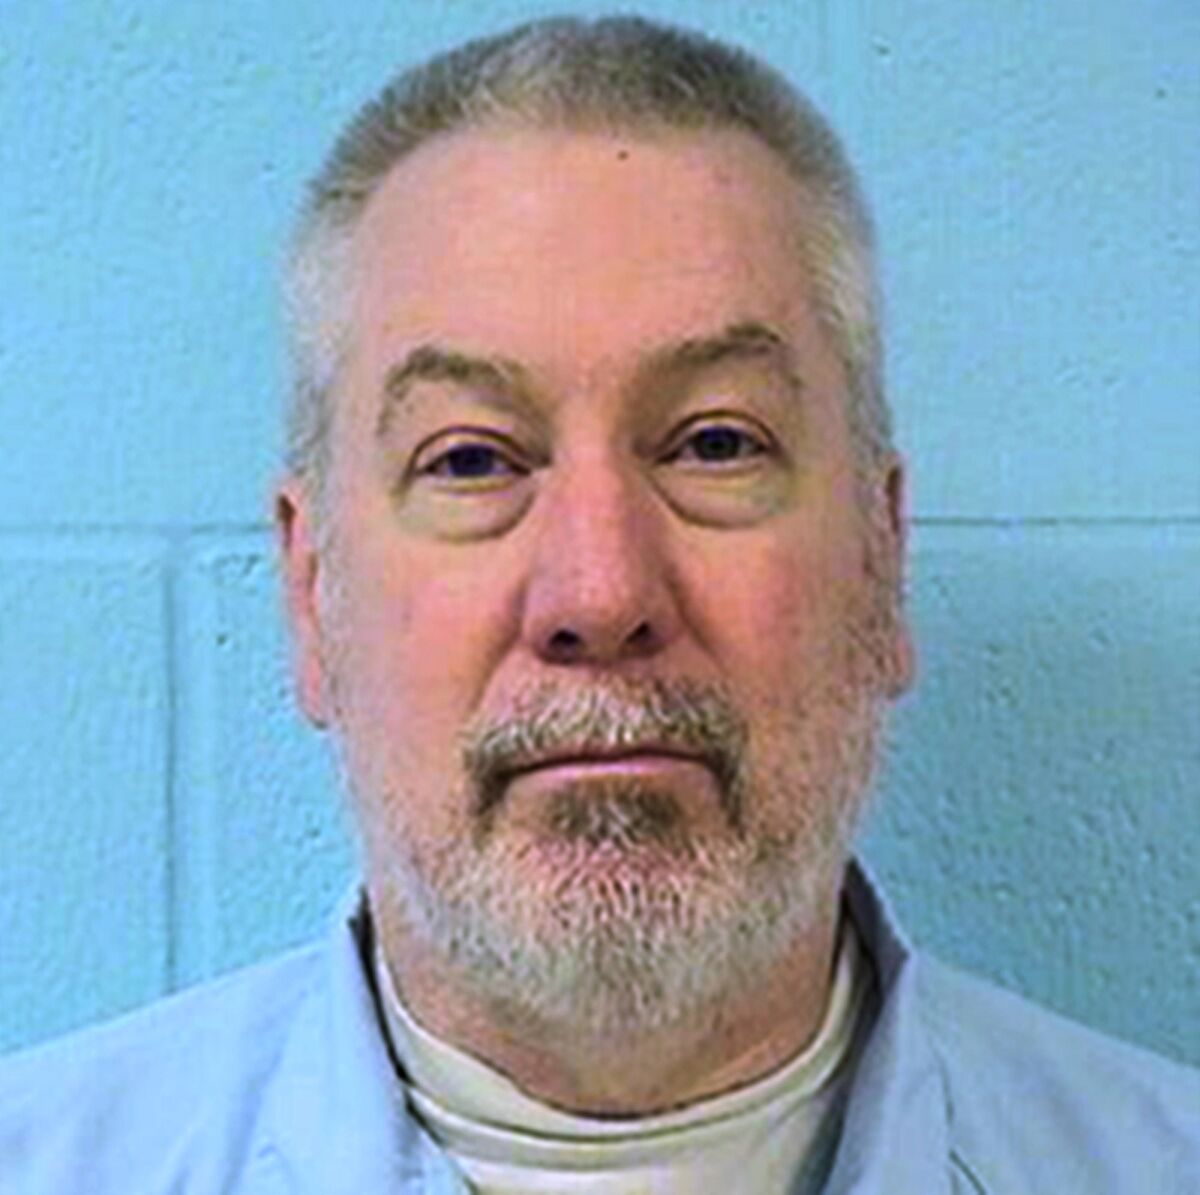 Former Bolingbrook, Ill., police officer Drew Peterson.